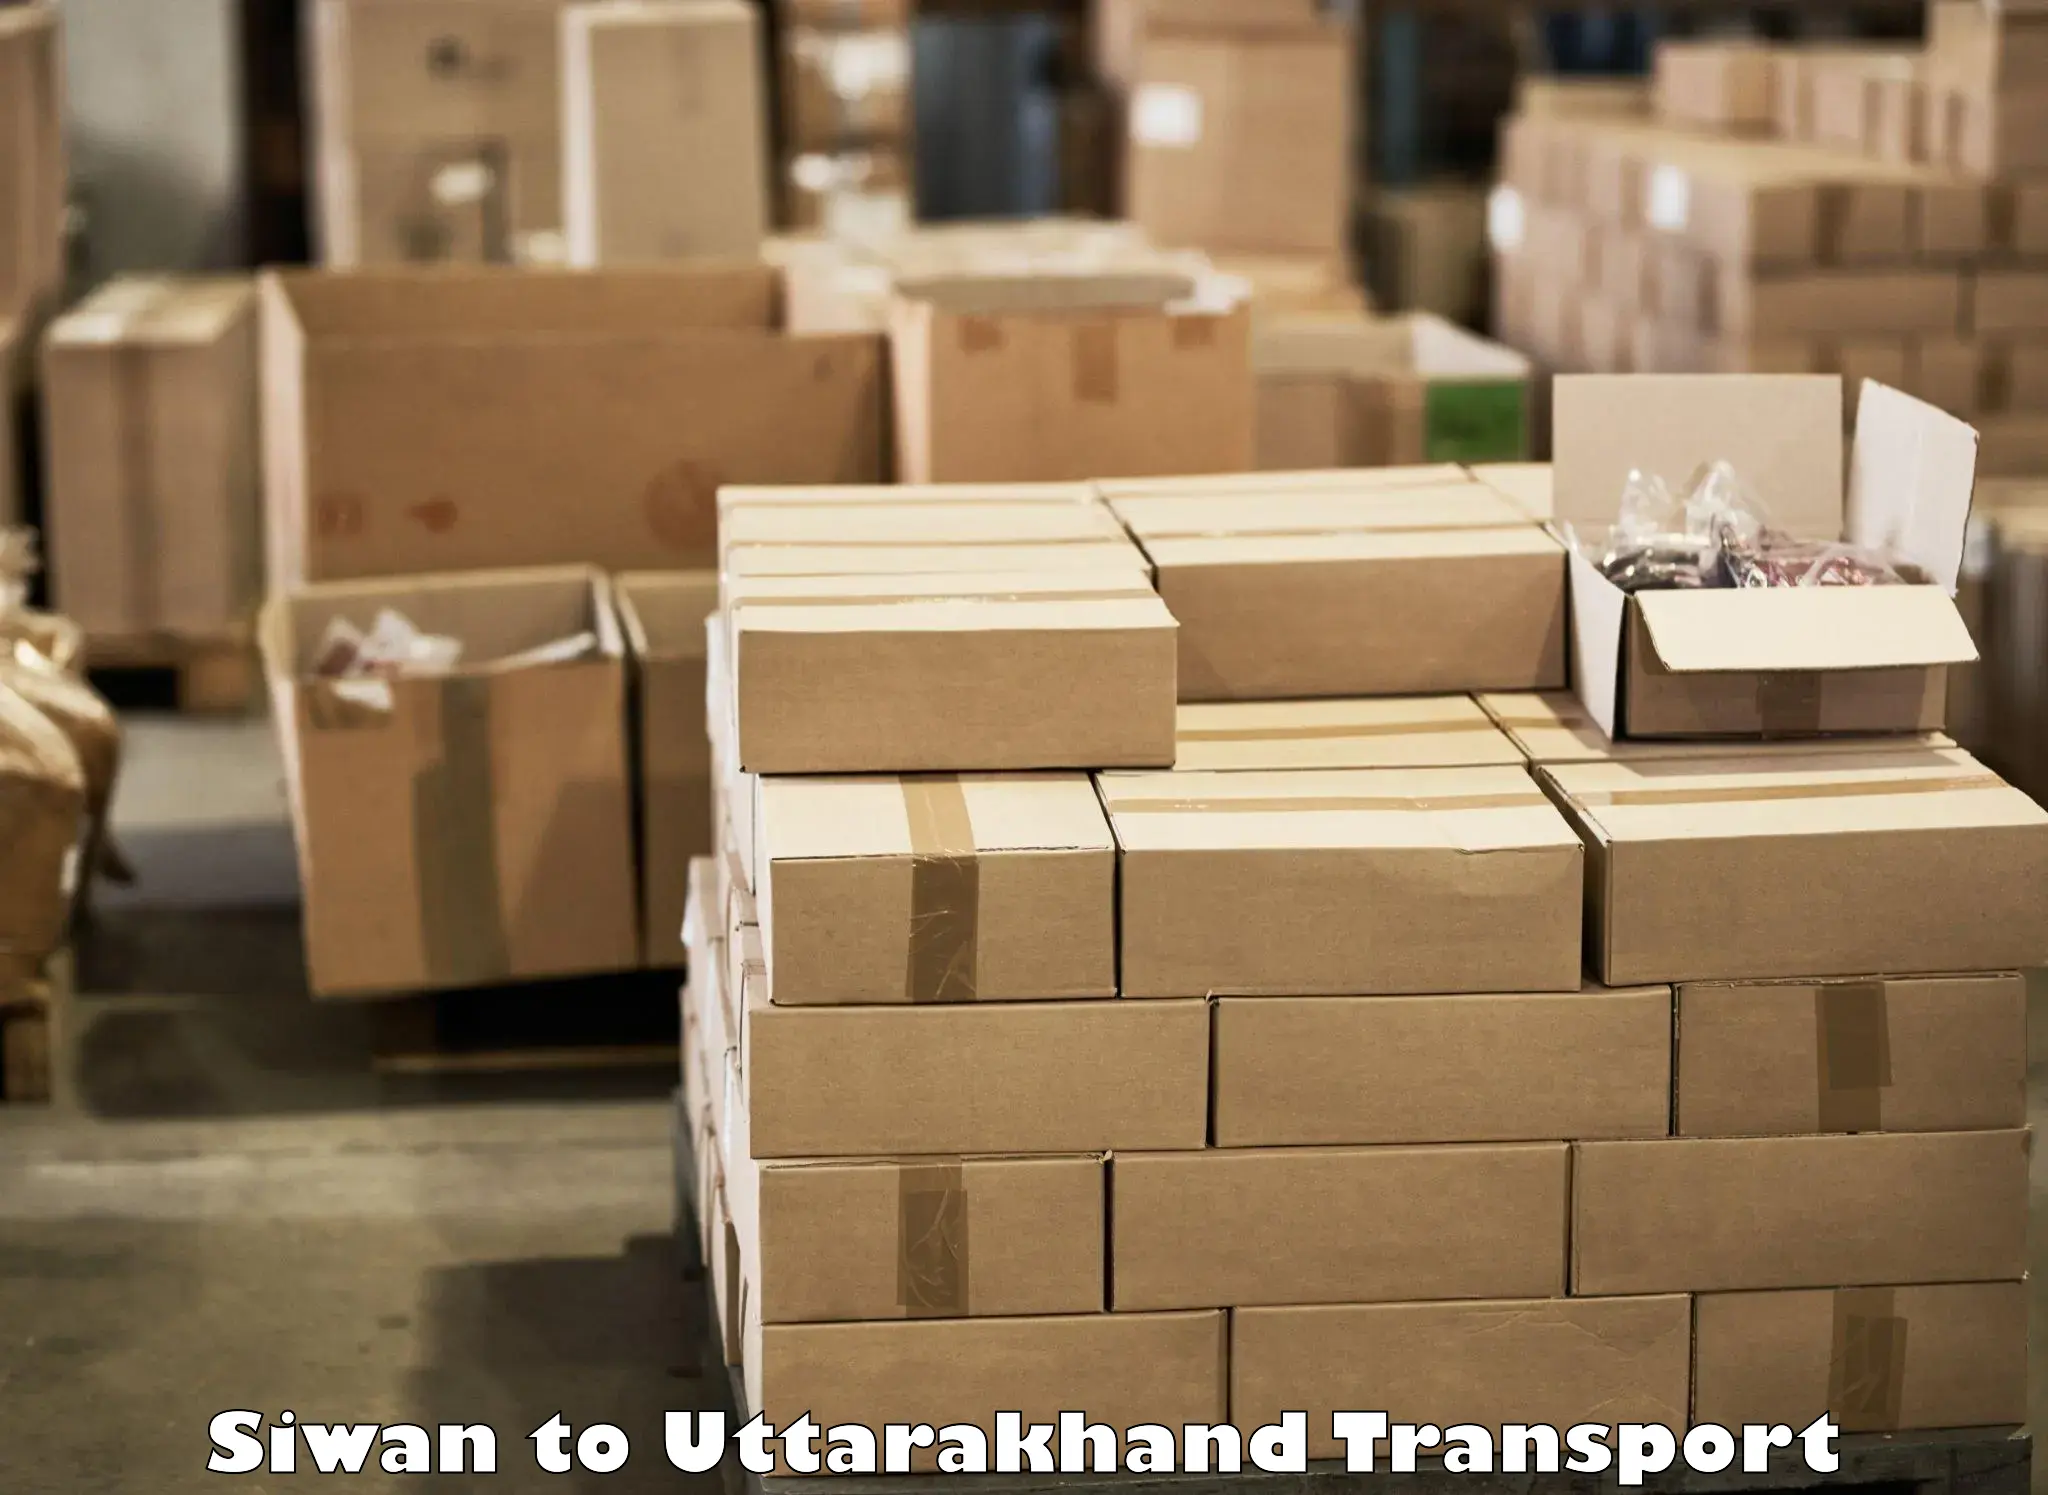 Container transport service Siwan to Rudraprayag